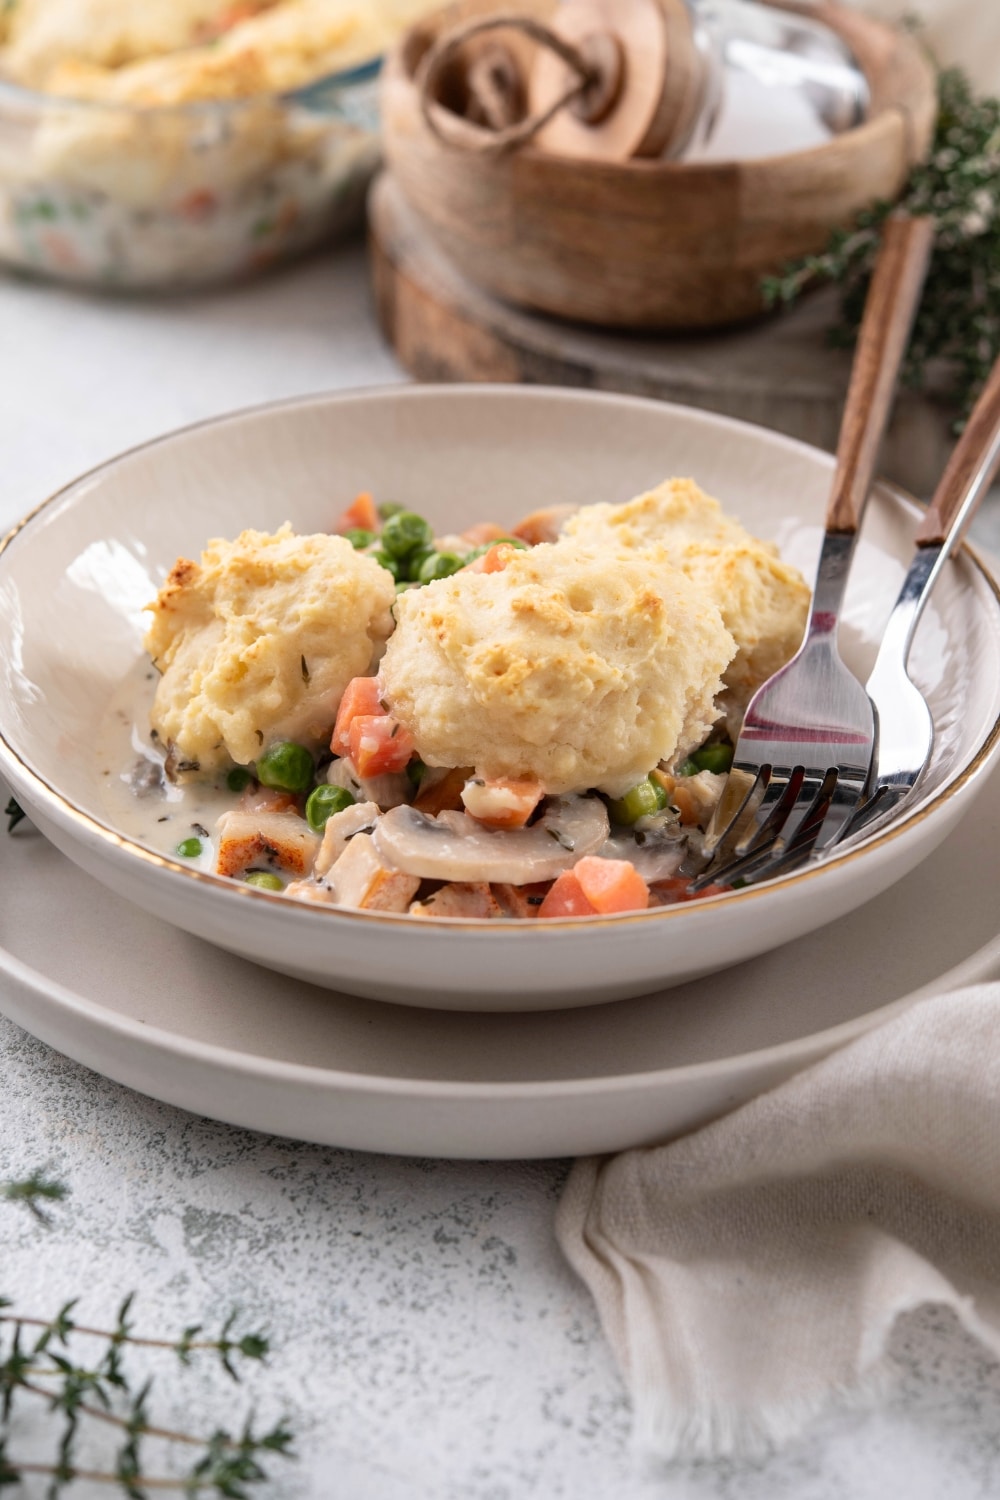 Three biscuits on top of chicken and veggies in a creamy sauce in a bowl with two forks. The bowl is on a white plate on a grey counter.